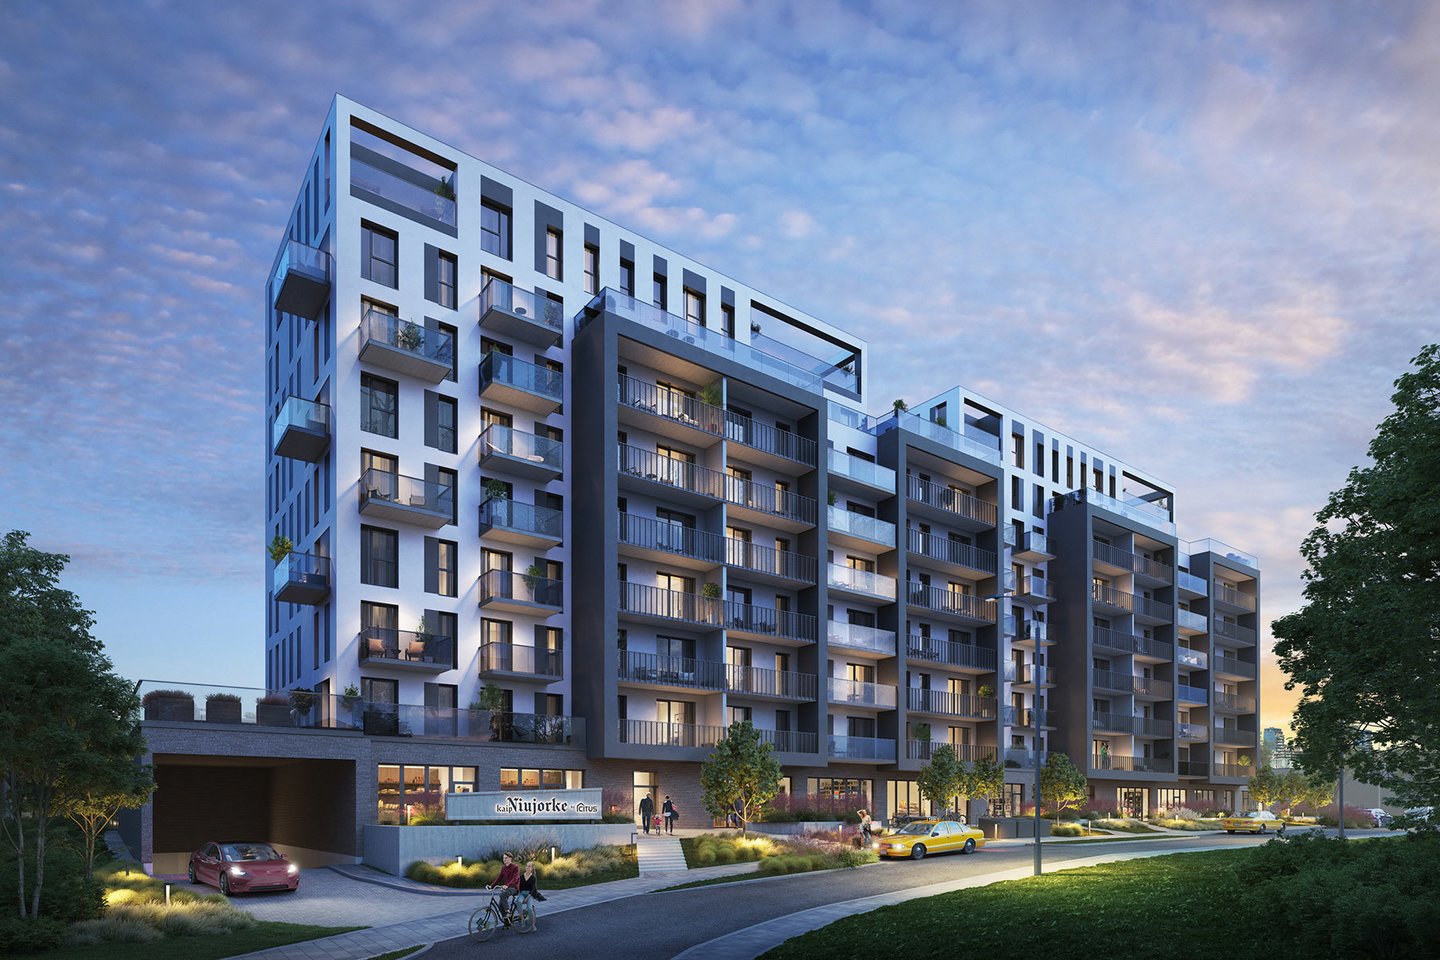 The site, which aims to replicate the New York conversion success story of this part of Vilnius, will offer 174 apartments and 11 commercial spaces in two phases.